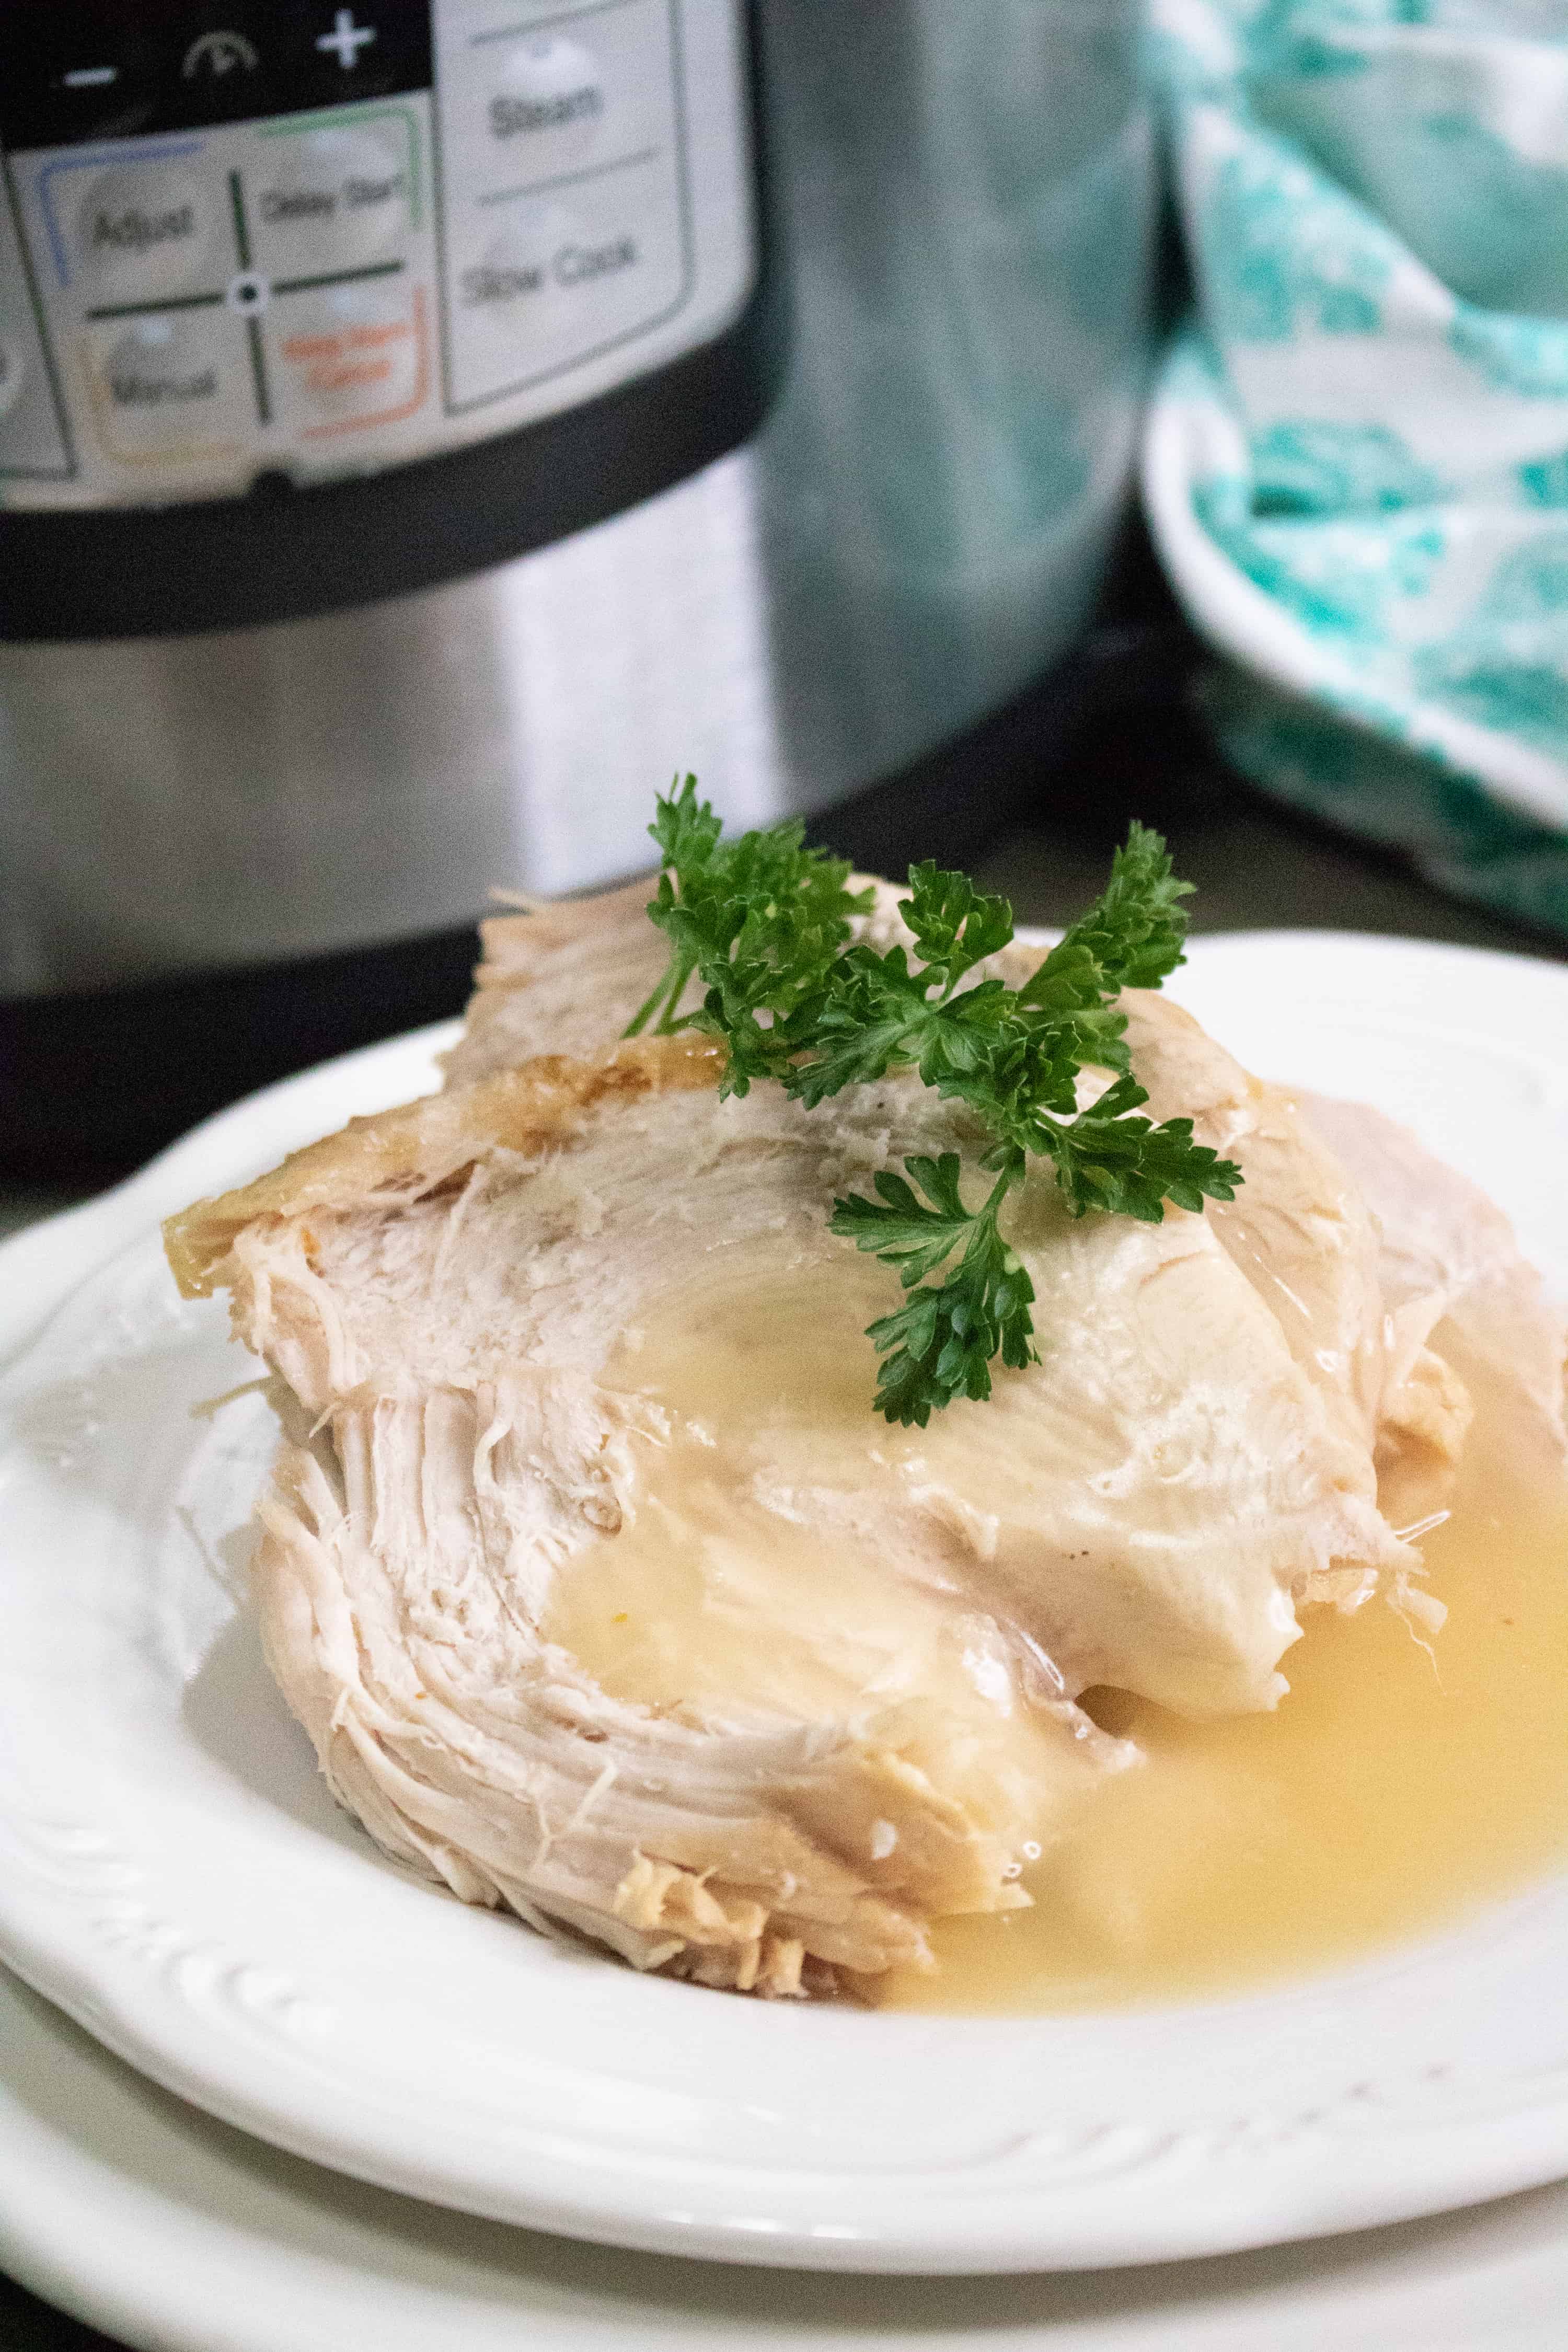 white poultry meat with gravy on a white plate